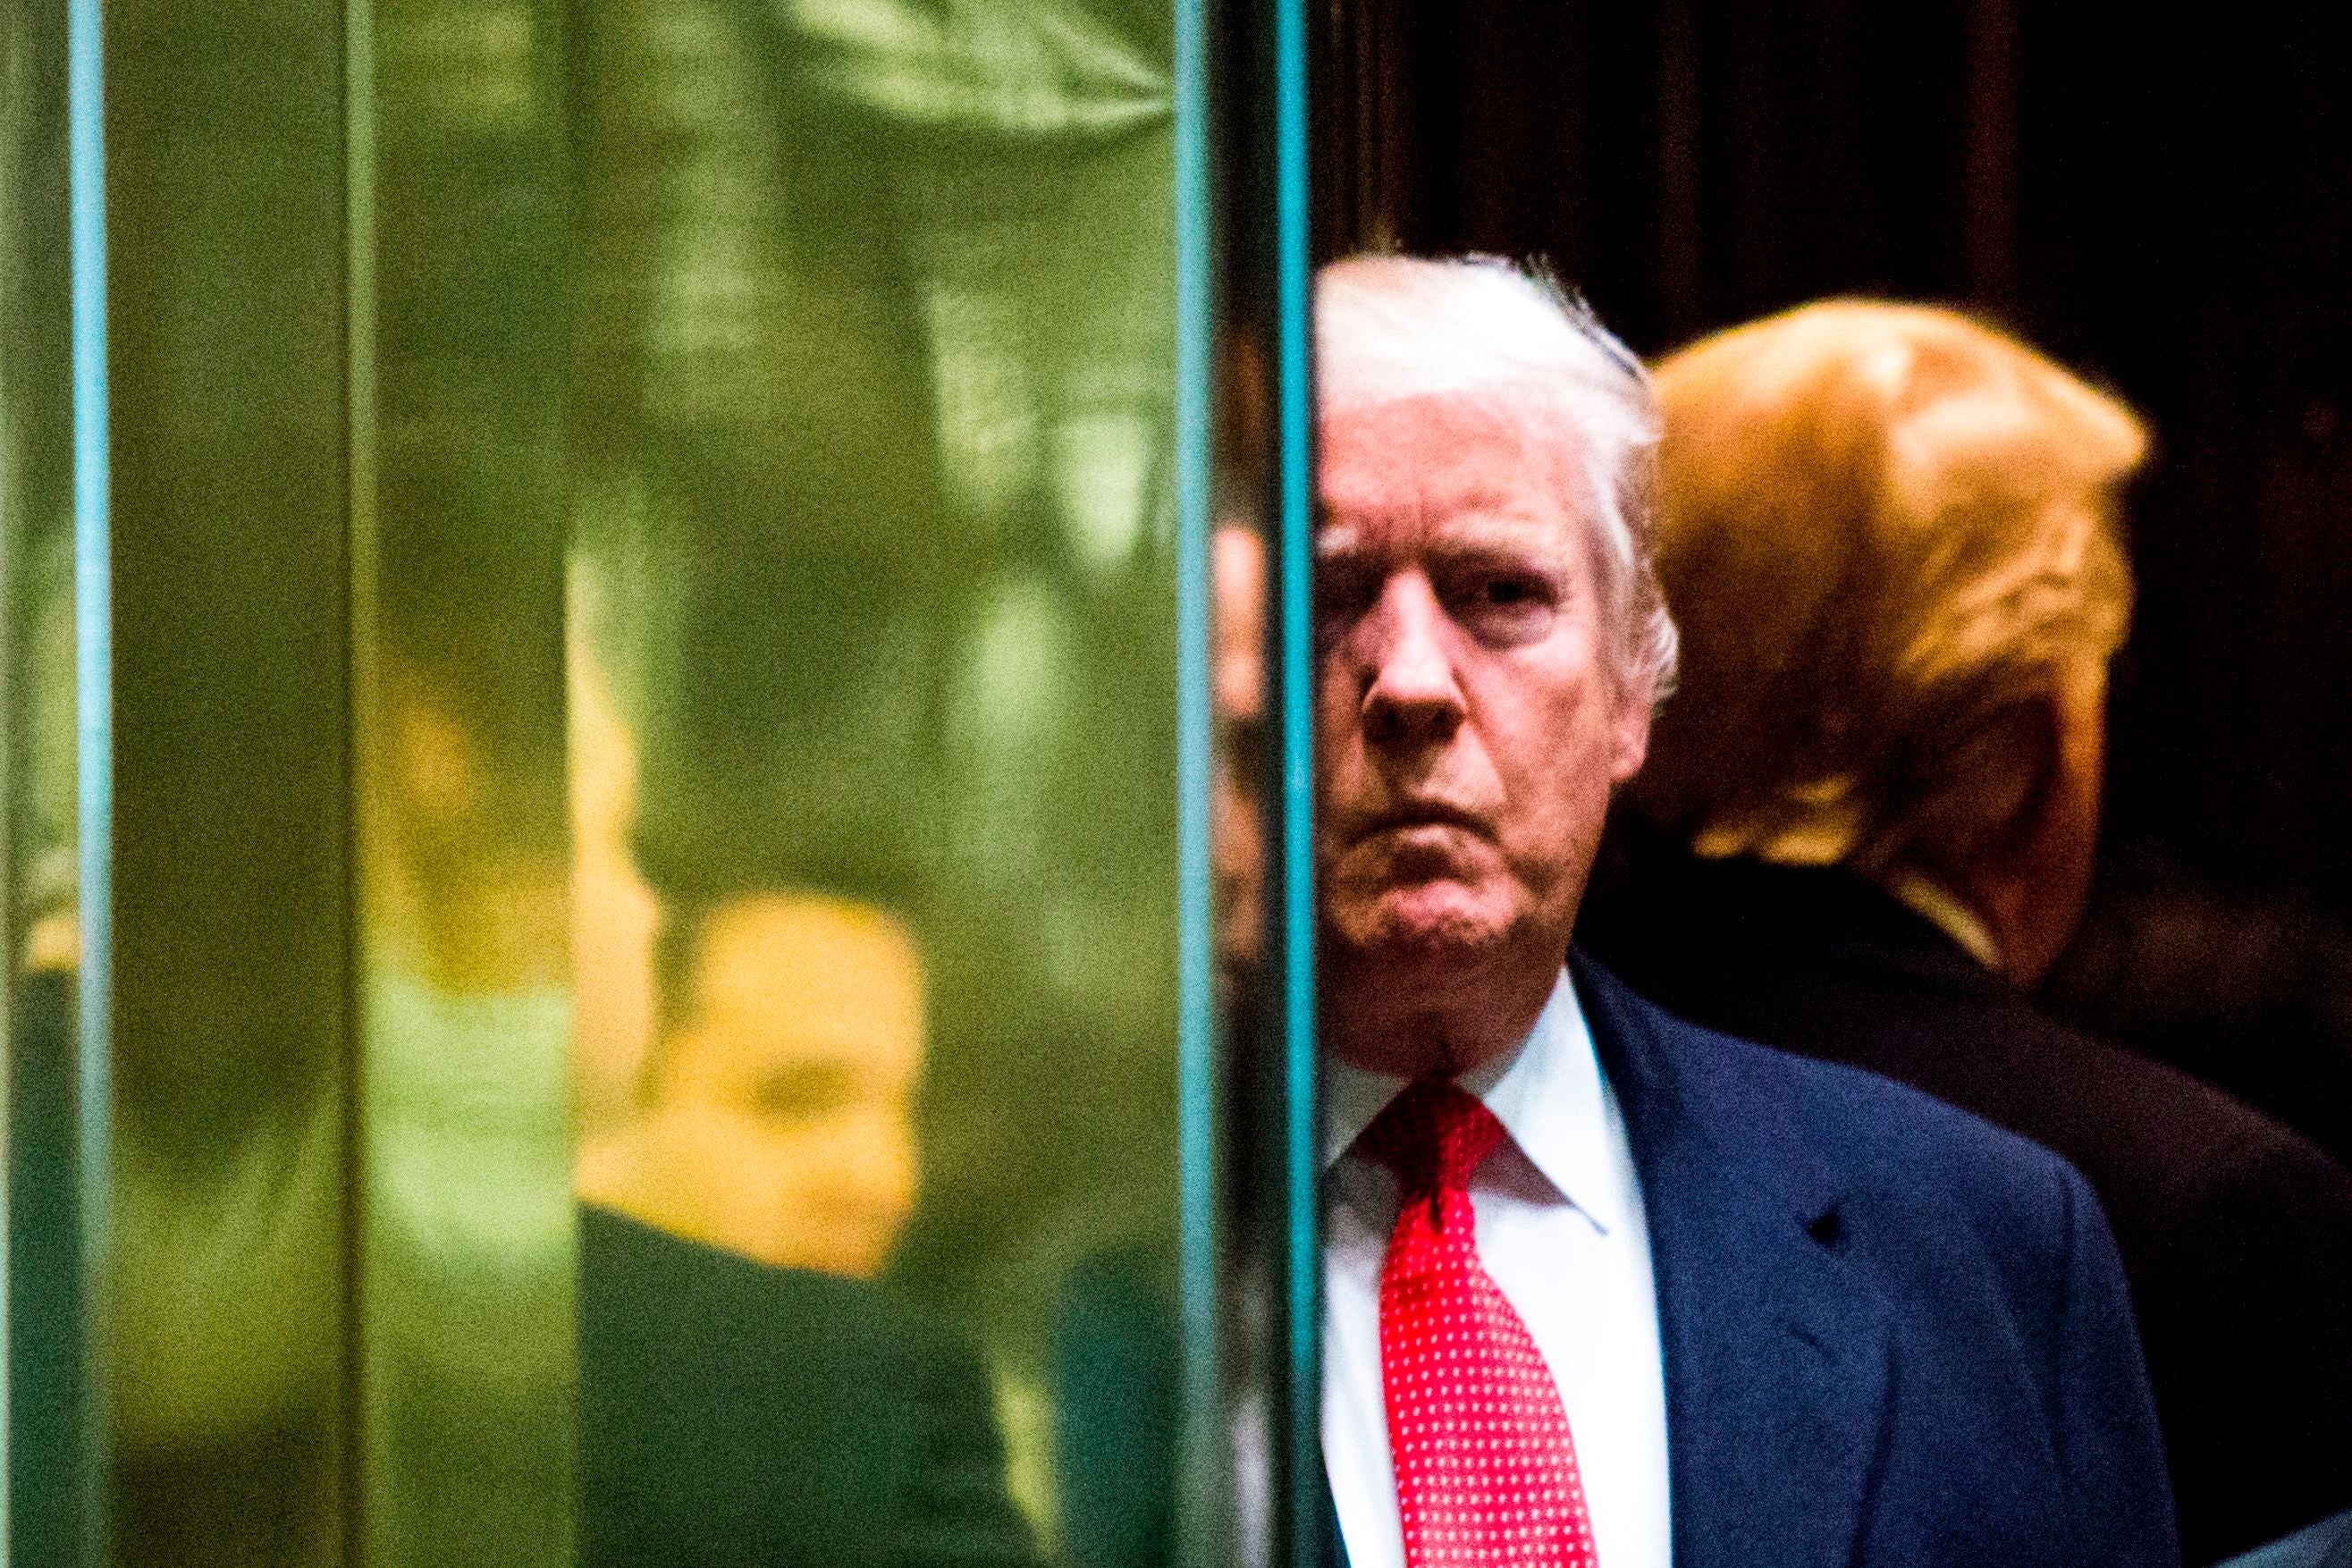 Donald Trump descended the elevator to enter the atrium at one of the Trump Towers ahead of announcing his presidential ambition in 2015